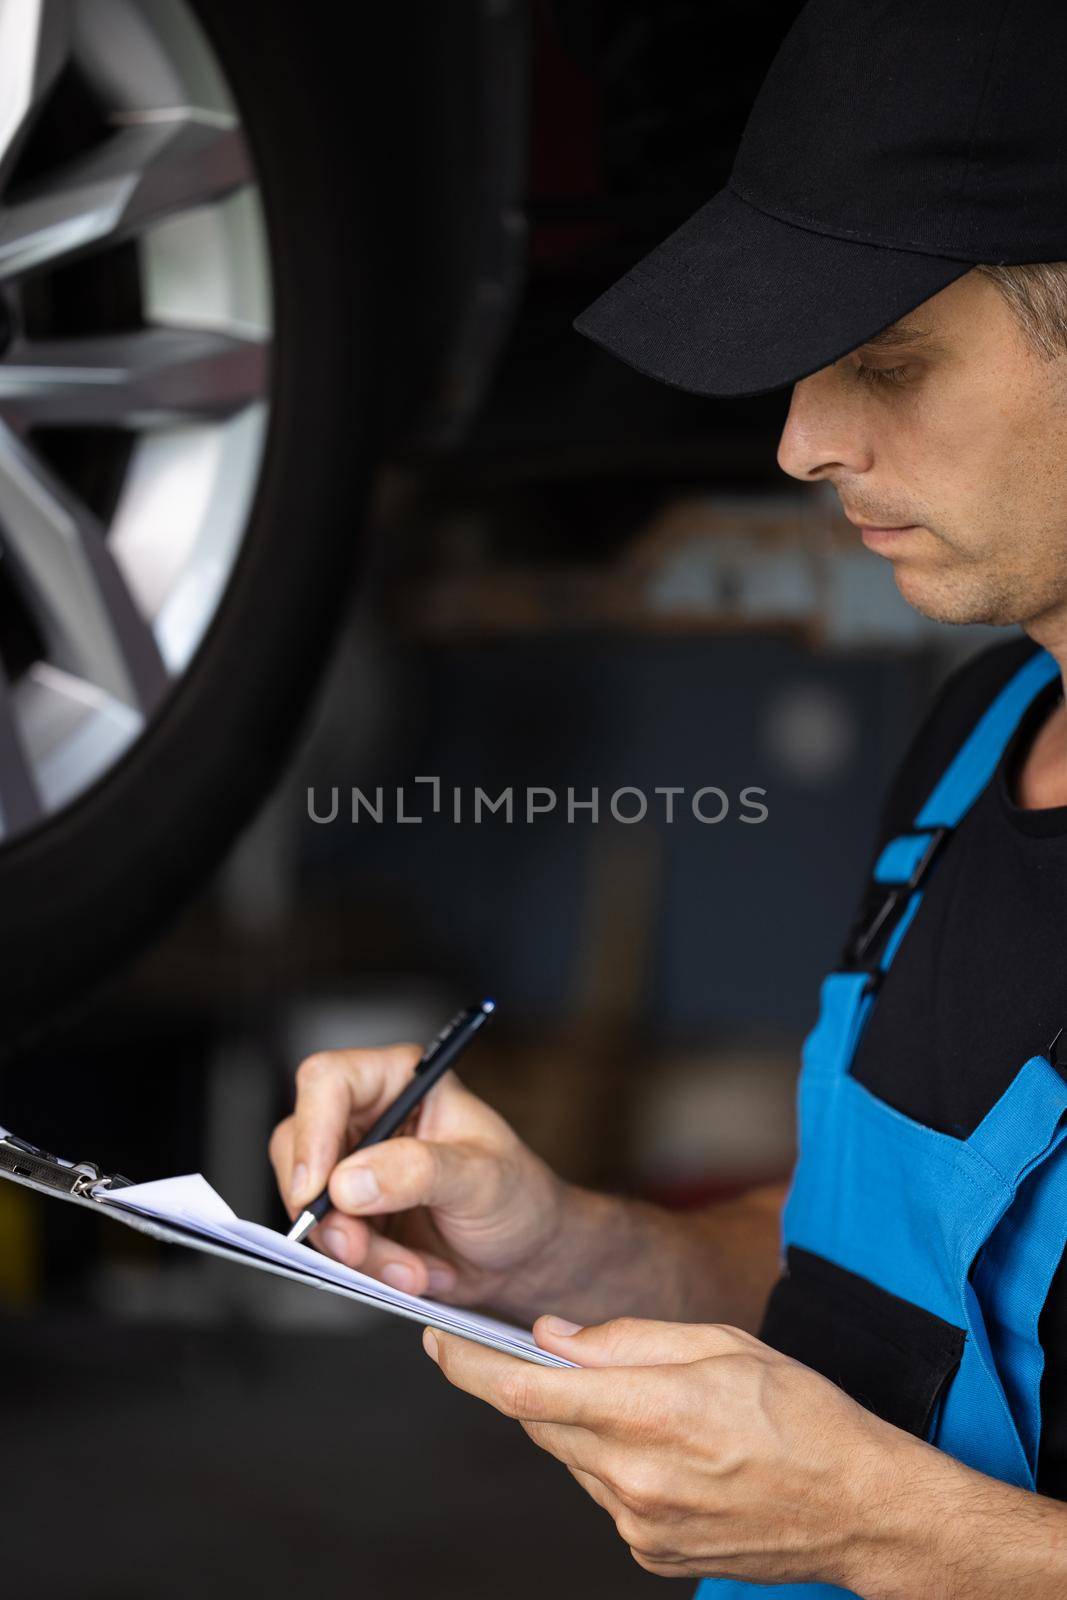 Car service employe inspect car. Mechanic inspects the car undercarriage way and makes a note on his inspection sheet. Automobile service, car mechanic. Modern workshop